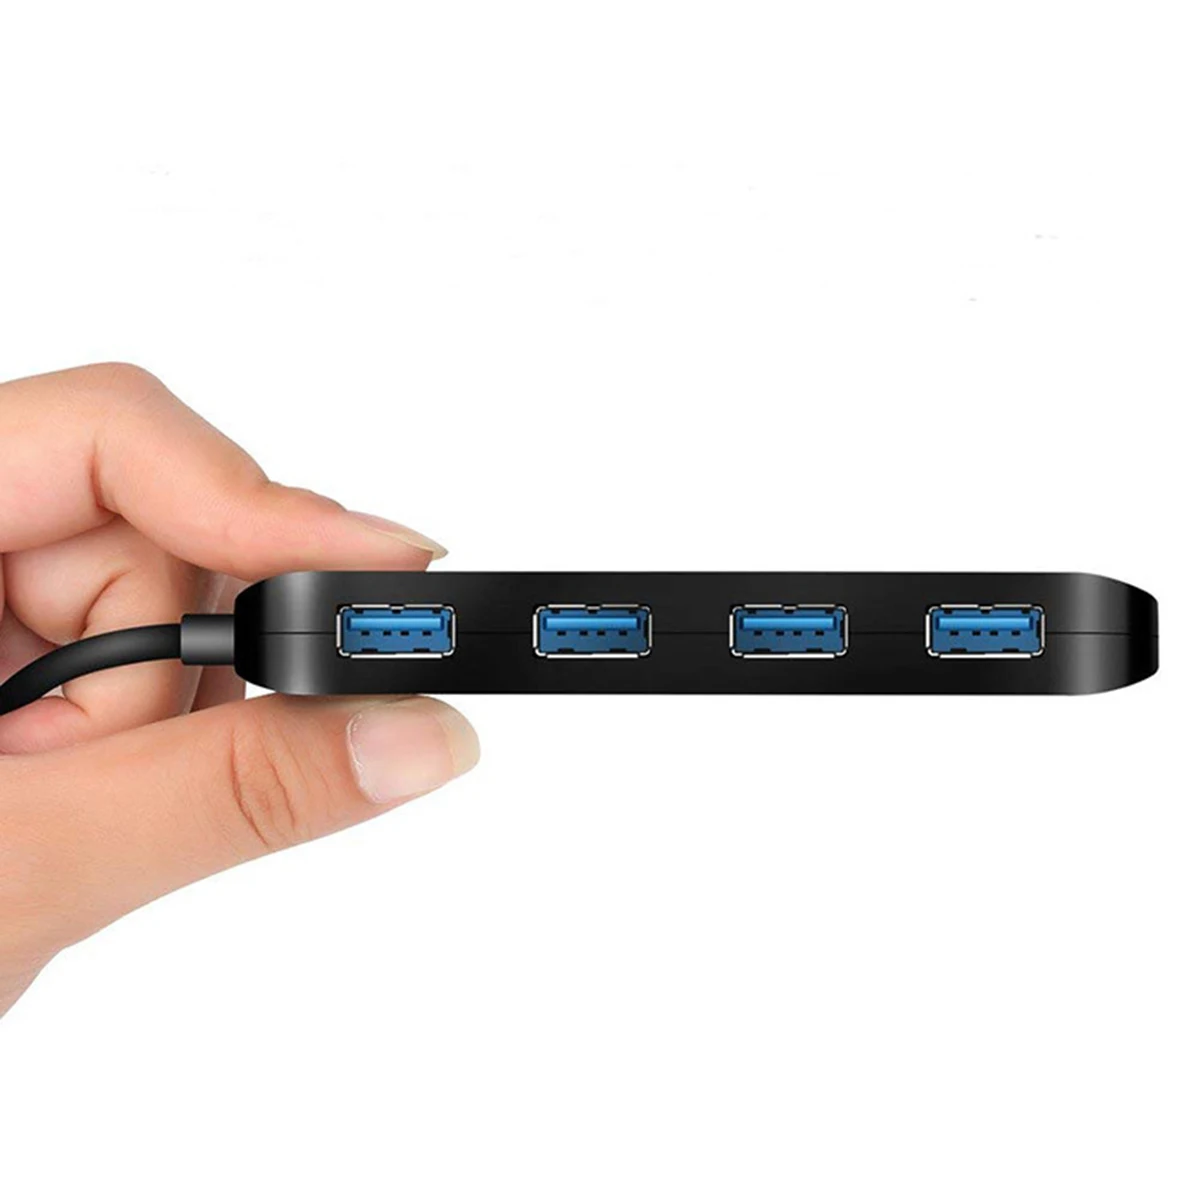 

4 Port USB3.0 HUB USB To USB3.0 Splitter Expansion Adapter With Switches LEDfor PC Laptop Independent Switch Indicator